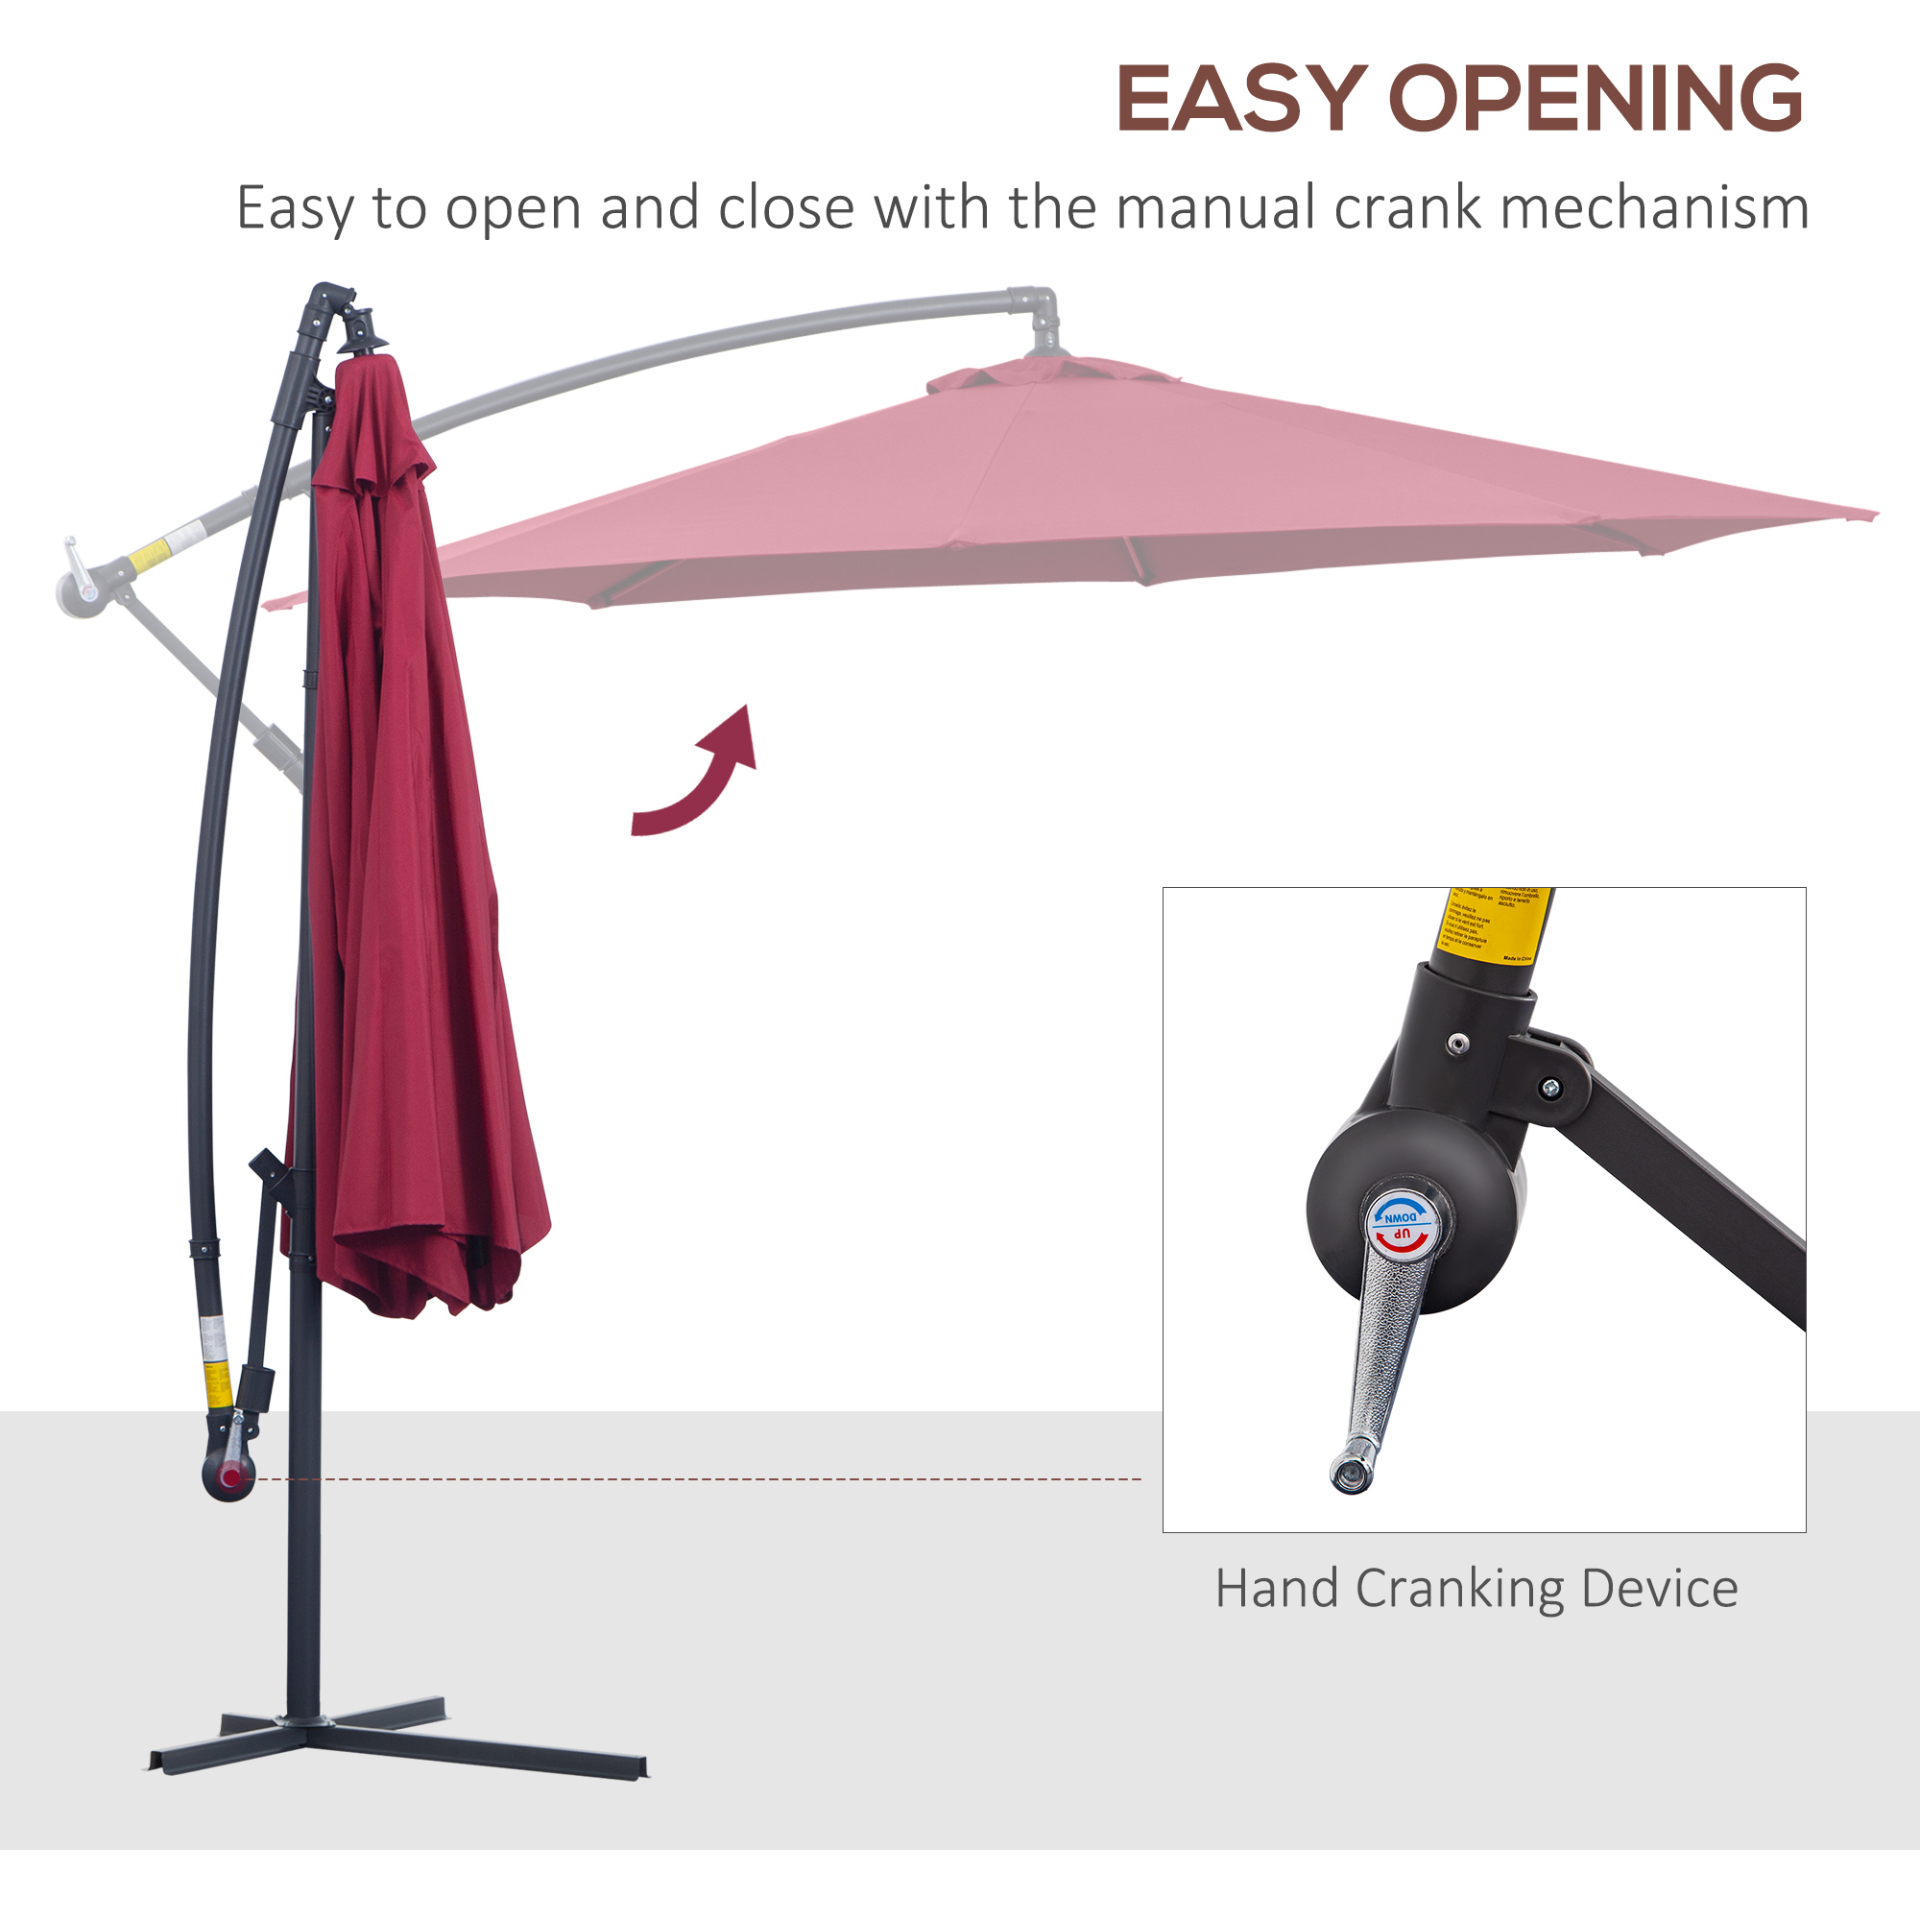 Outsunny 3(m) Garden Banana Parasol Hanging Cantilever Umbrella with Crank Handle and Cross Base for Outdoor, Sun Shade, Wine Red